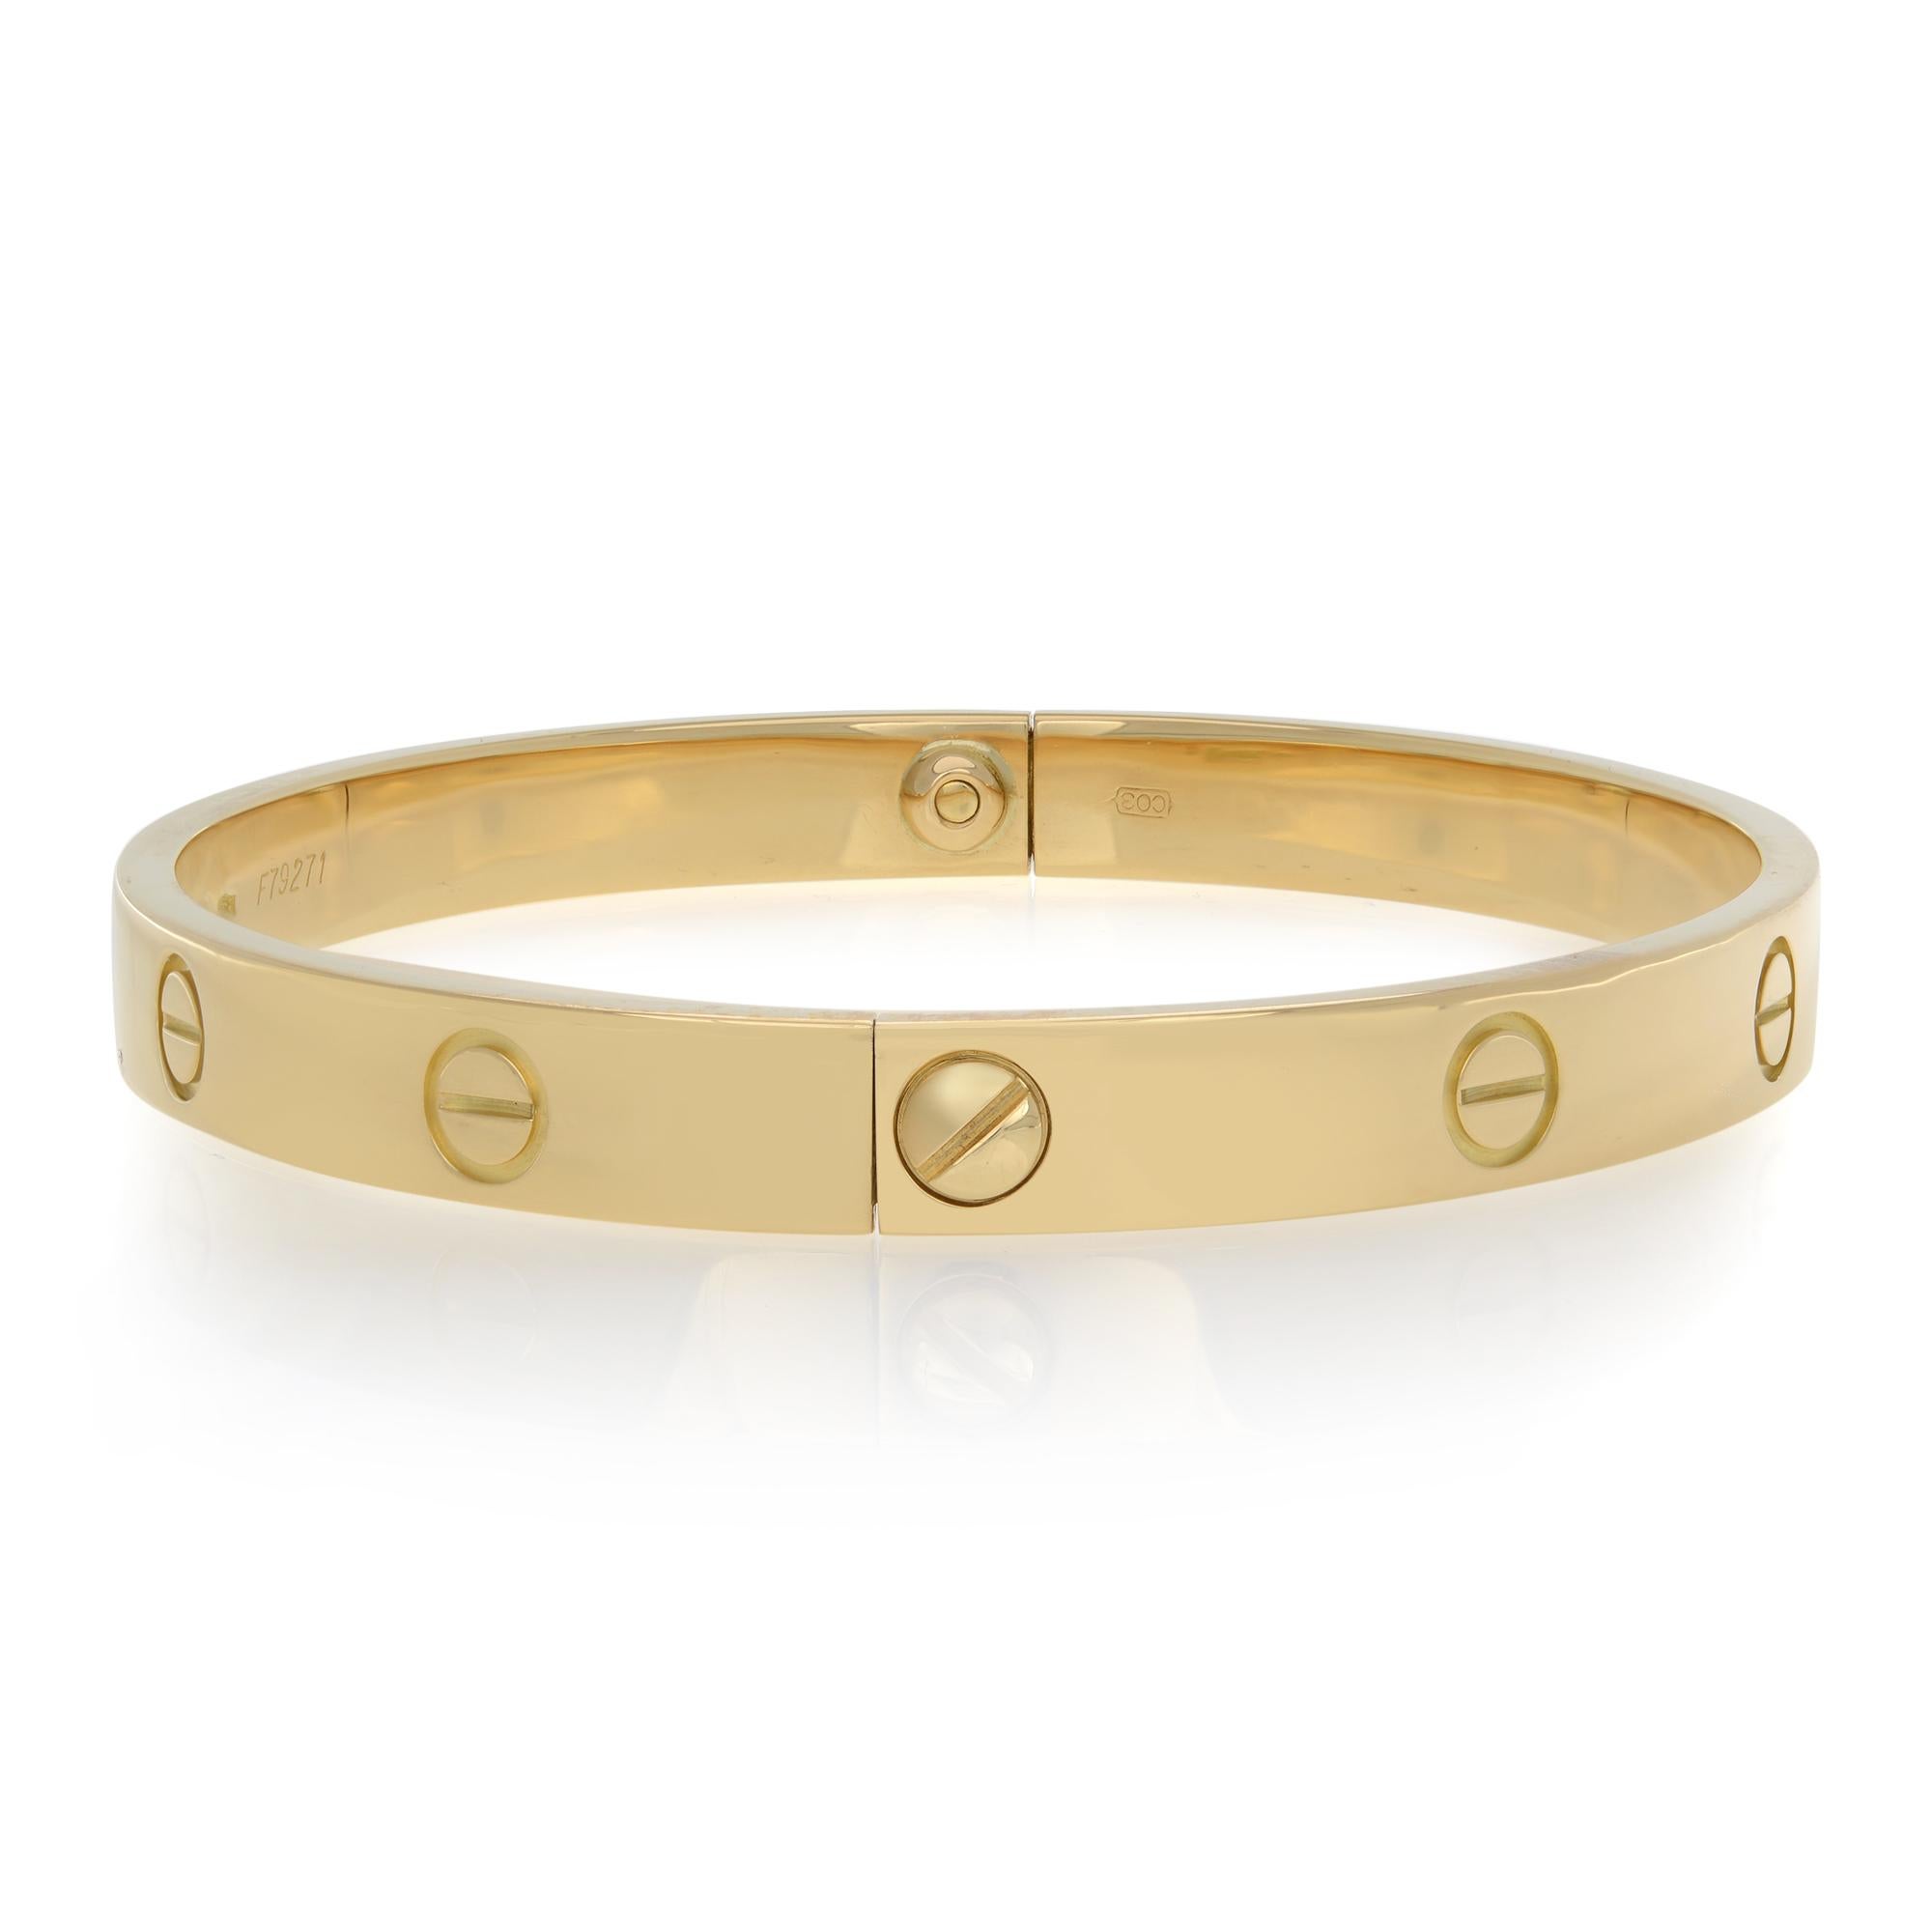 Cartier classic Love bracelet in 18K yellow gold. Size 19. Old style screw system. Width: 6.1mm. Size 19. Great pre-owned condition. Comes with screwdriver.; Original box and papers are not included. 